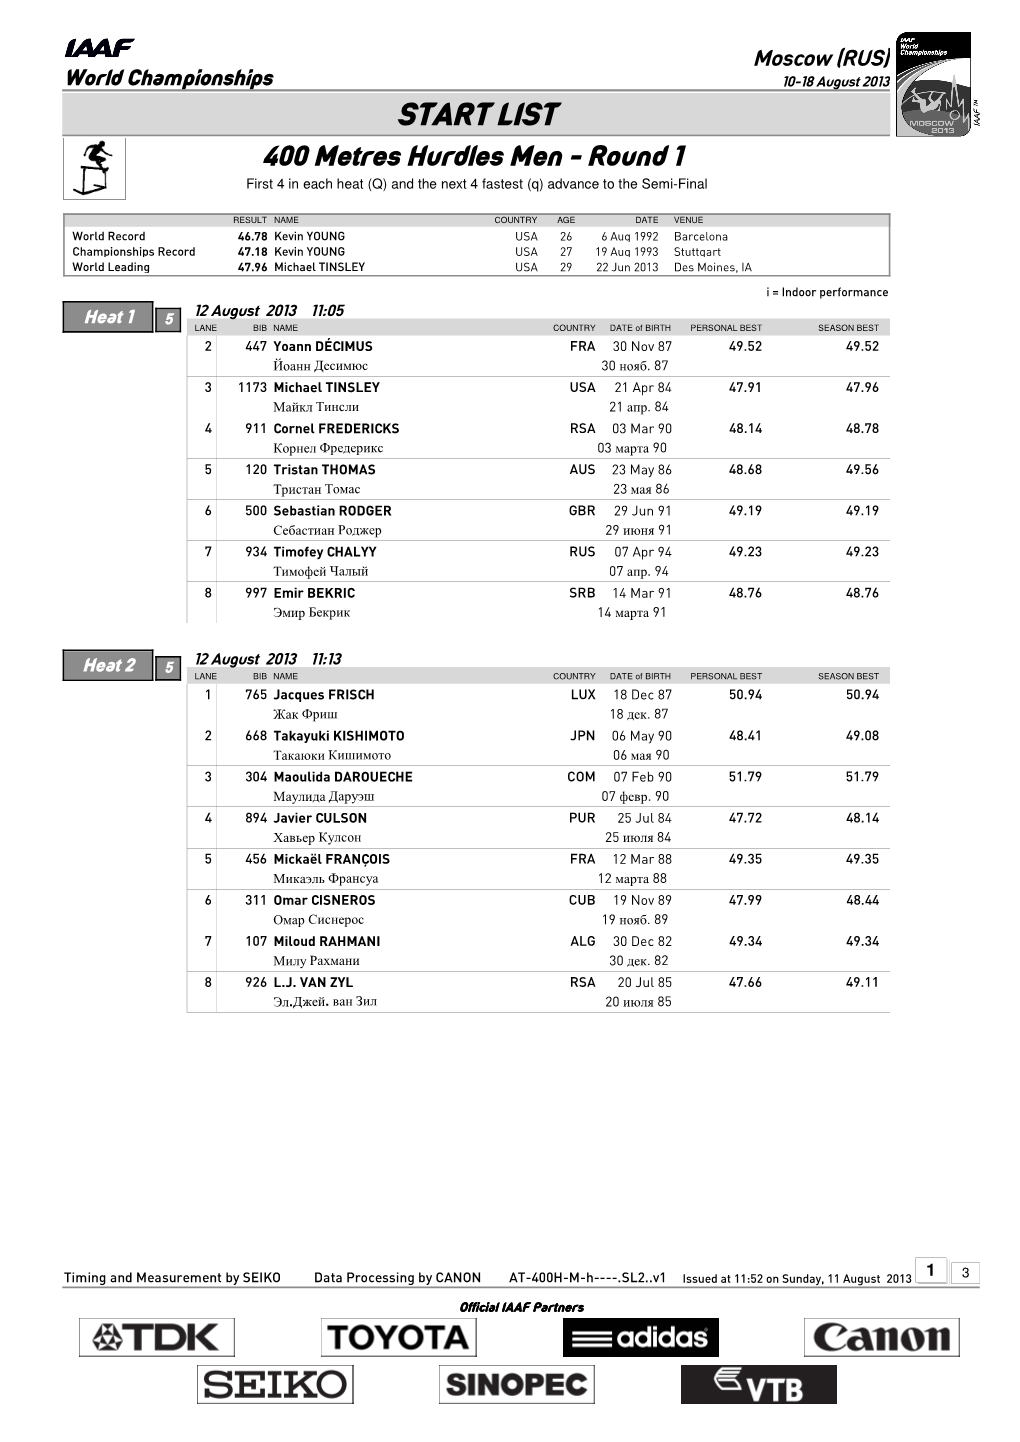 START LIST 400 Metres Hurdles Men - Round 1 First 4 in Each Heat (Q) and the Next 4 Fastest (Q) Advance to the Semi-Final